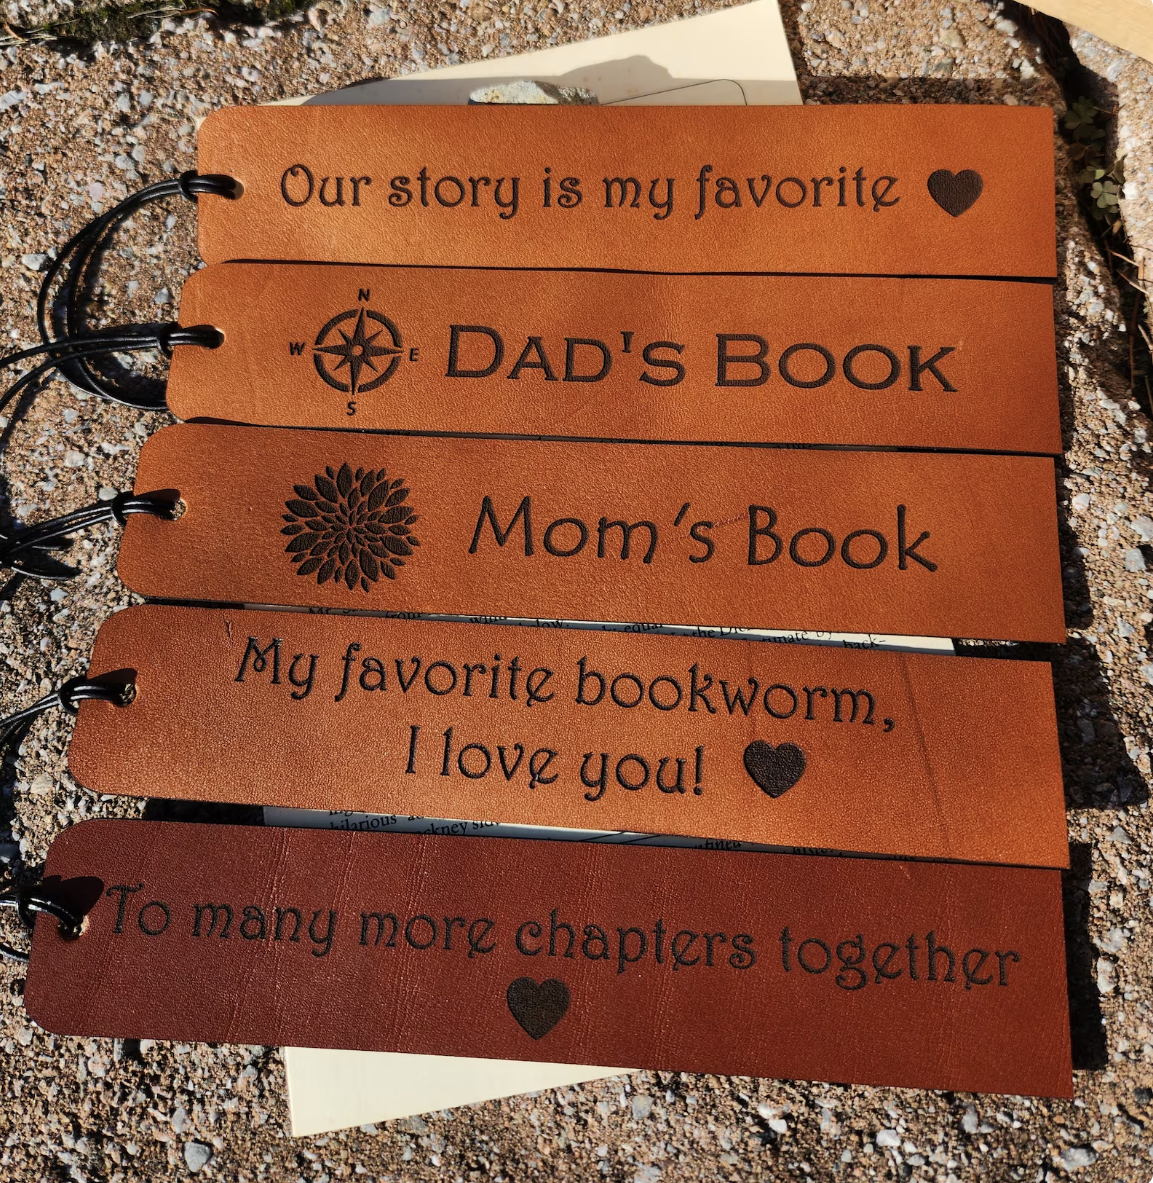 Couples Initials personalized book mark - To many more chapters